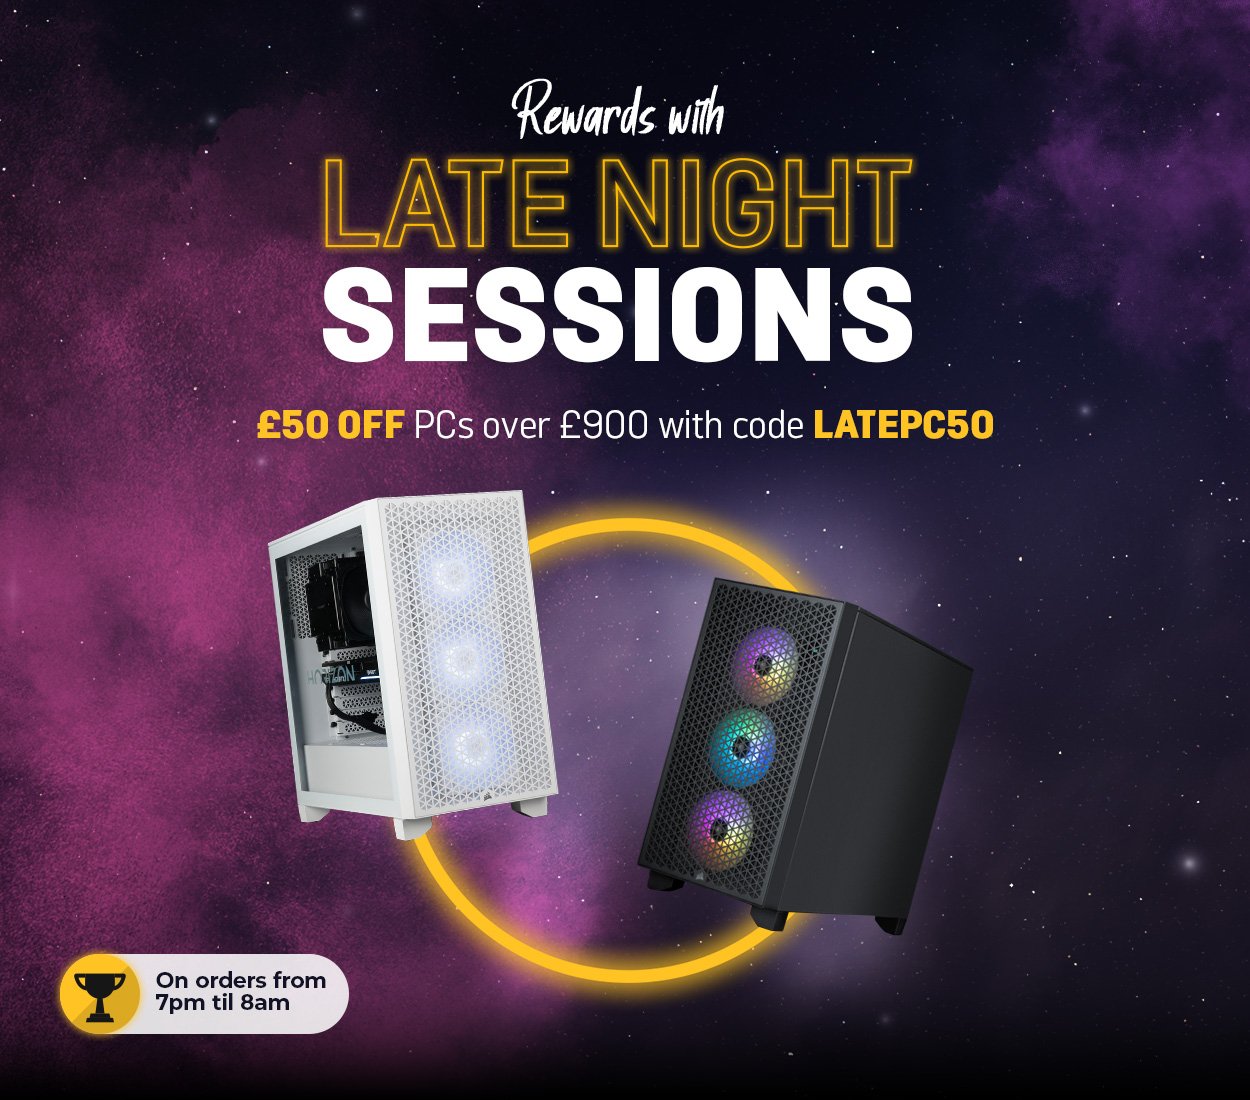 Late Night Sessions PC Promo